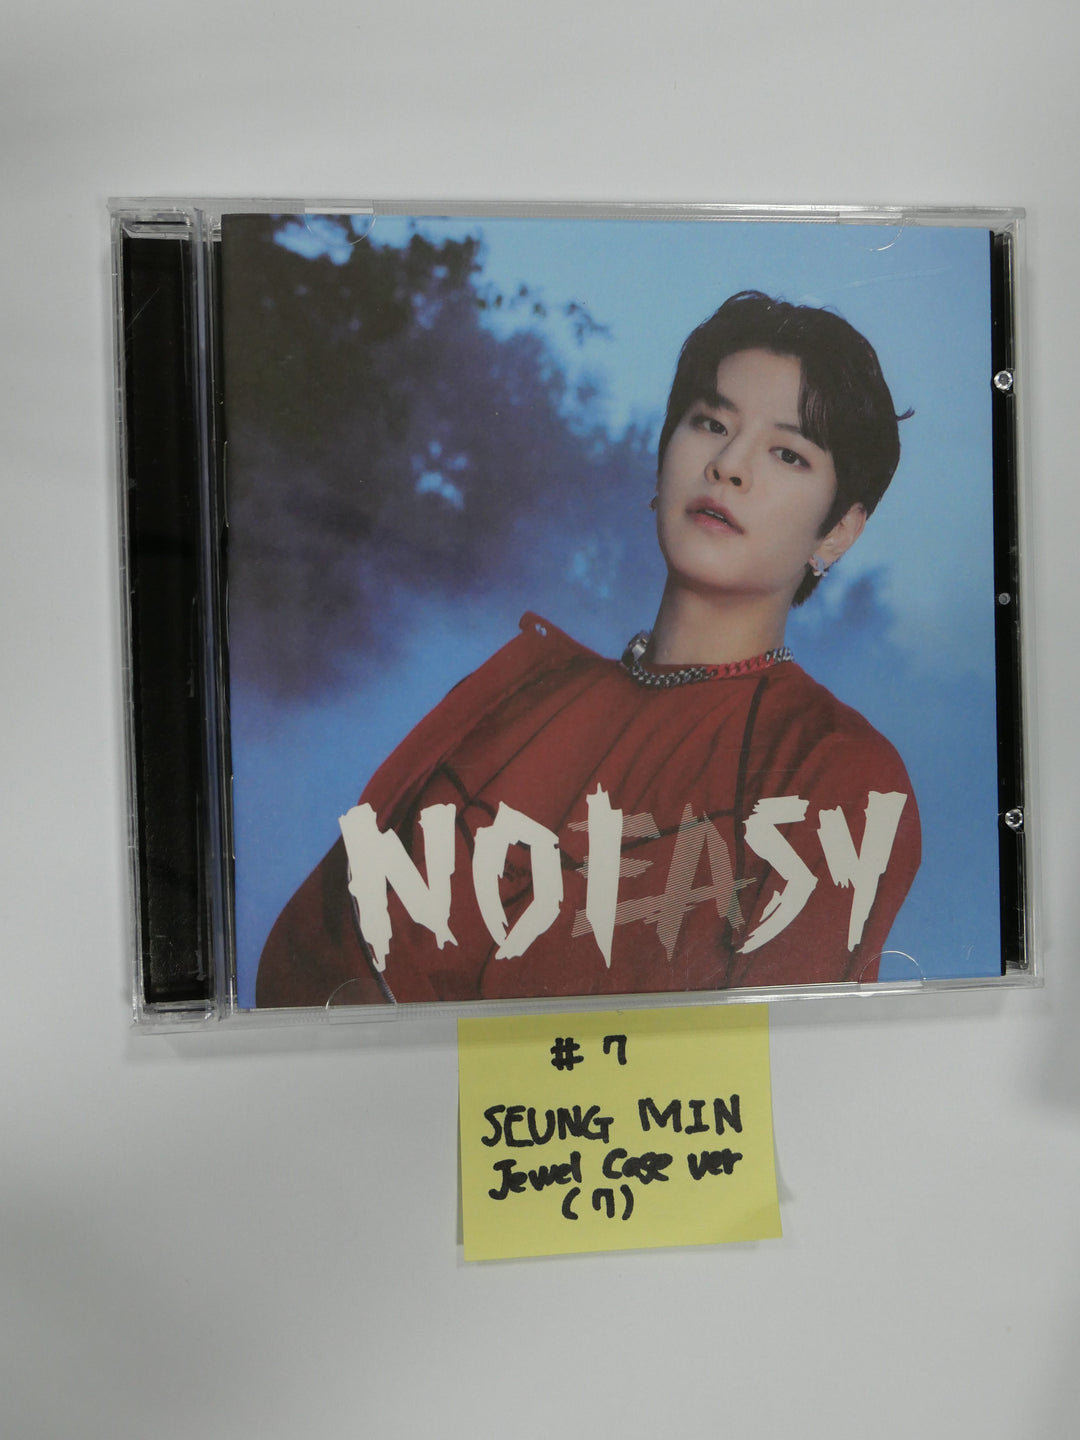 Stray Kids "No Easy" Vol.2 - Jewel Case Ver CD (No Photocard / Opened)